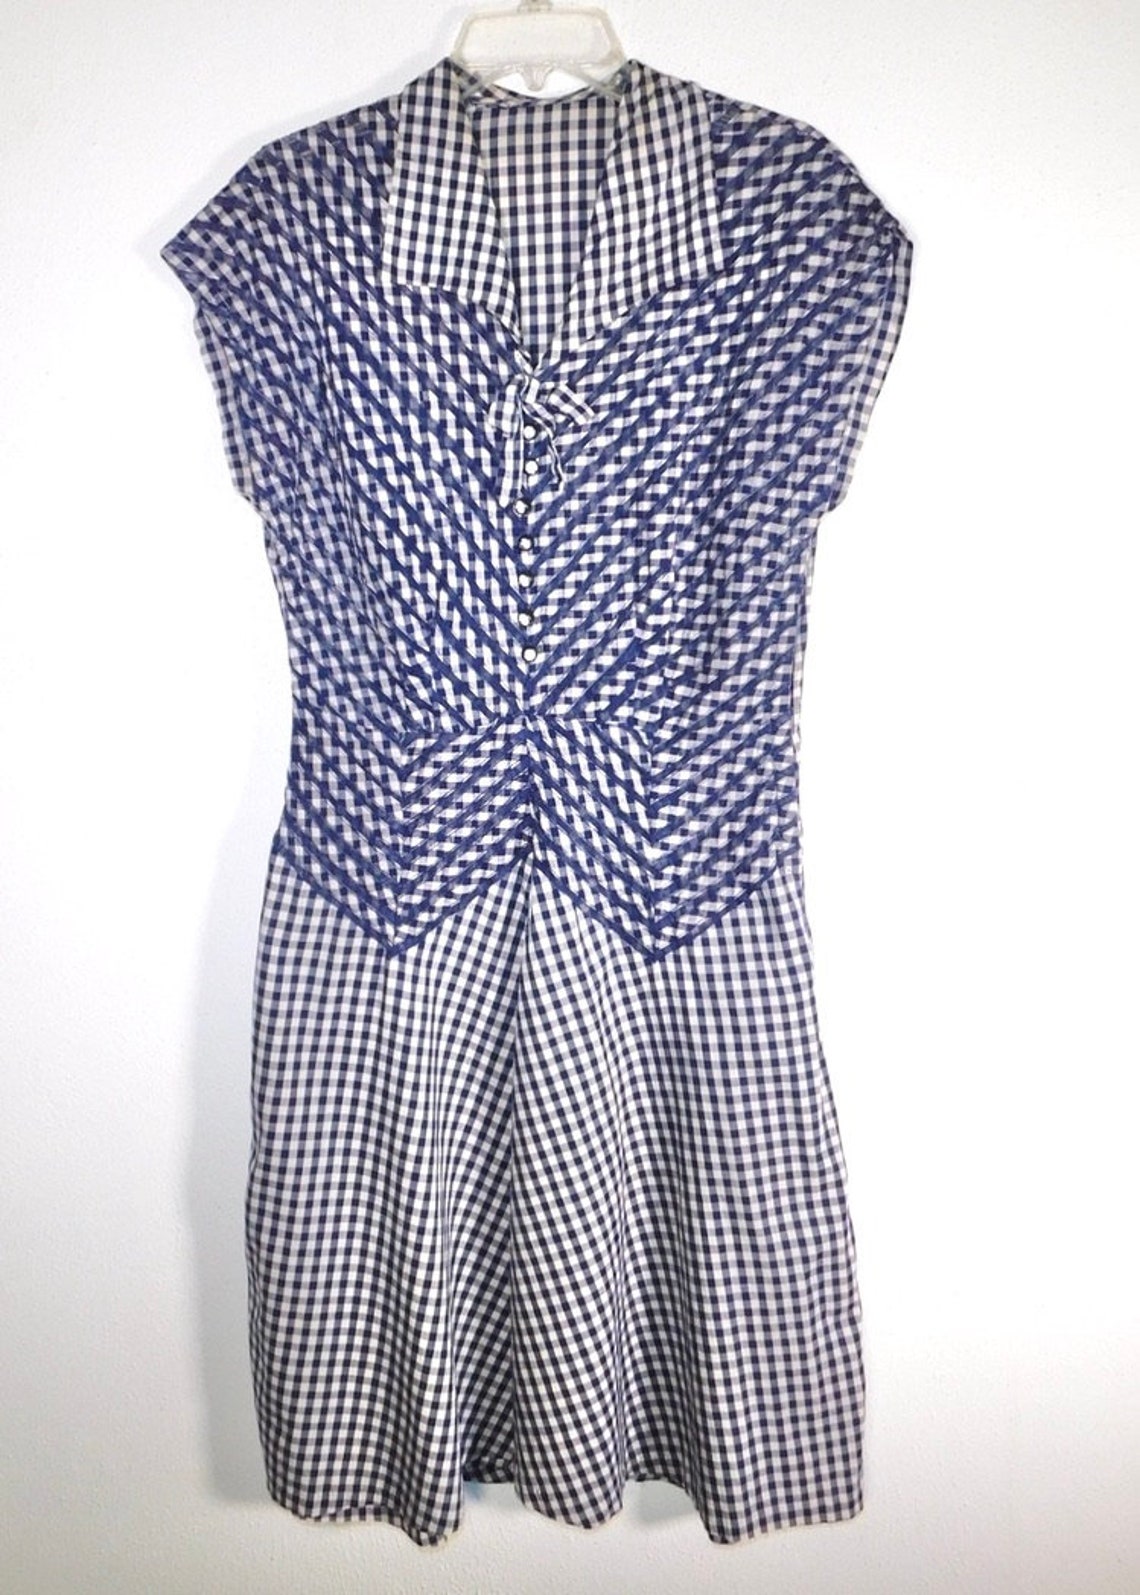 Vintage 1950s Gingham Check Day Dress W Cutwork Bust & - Etsy